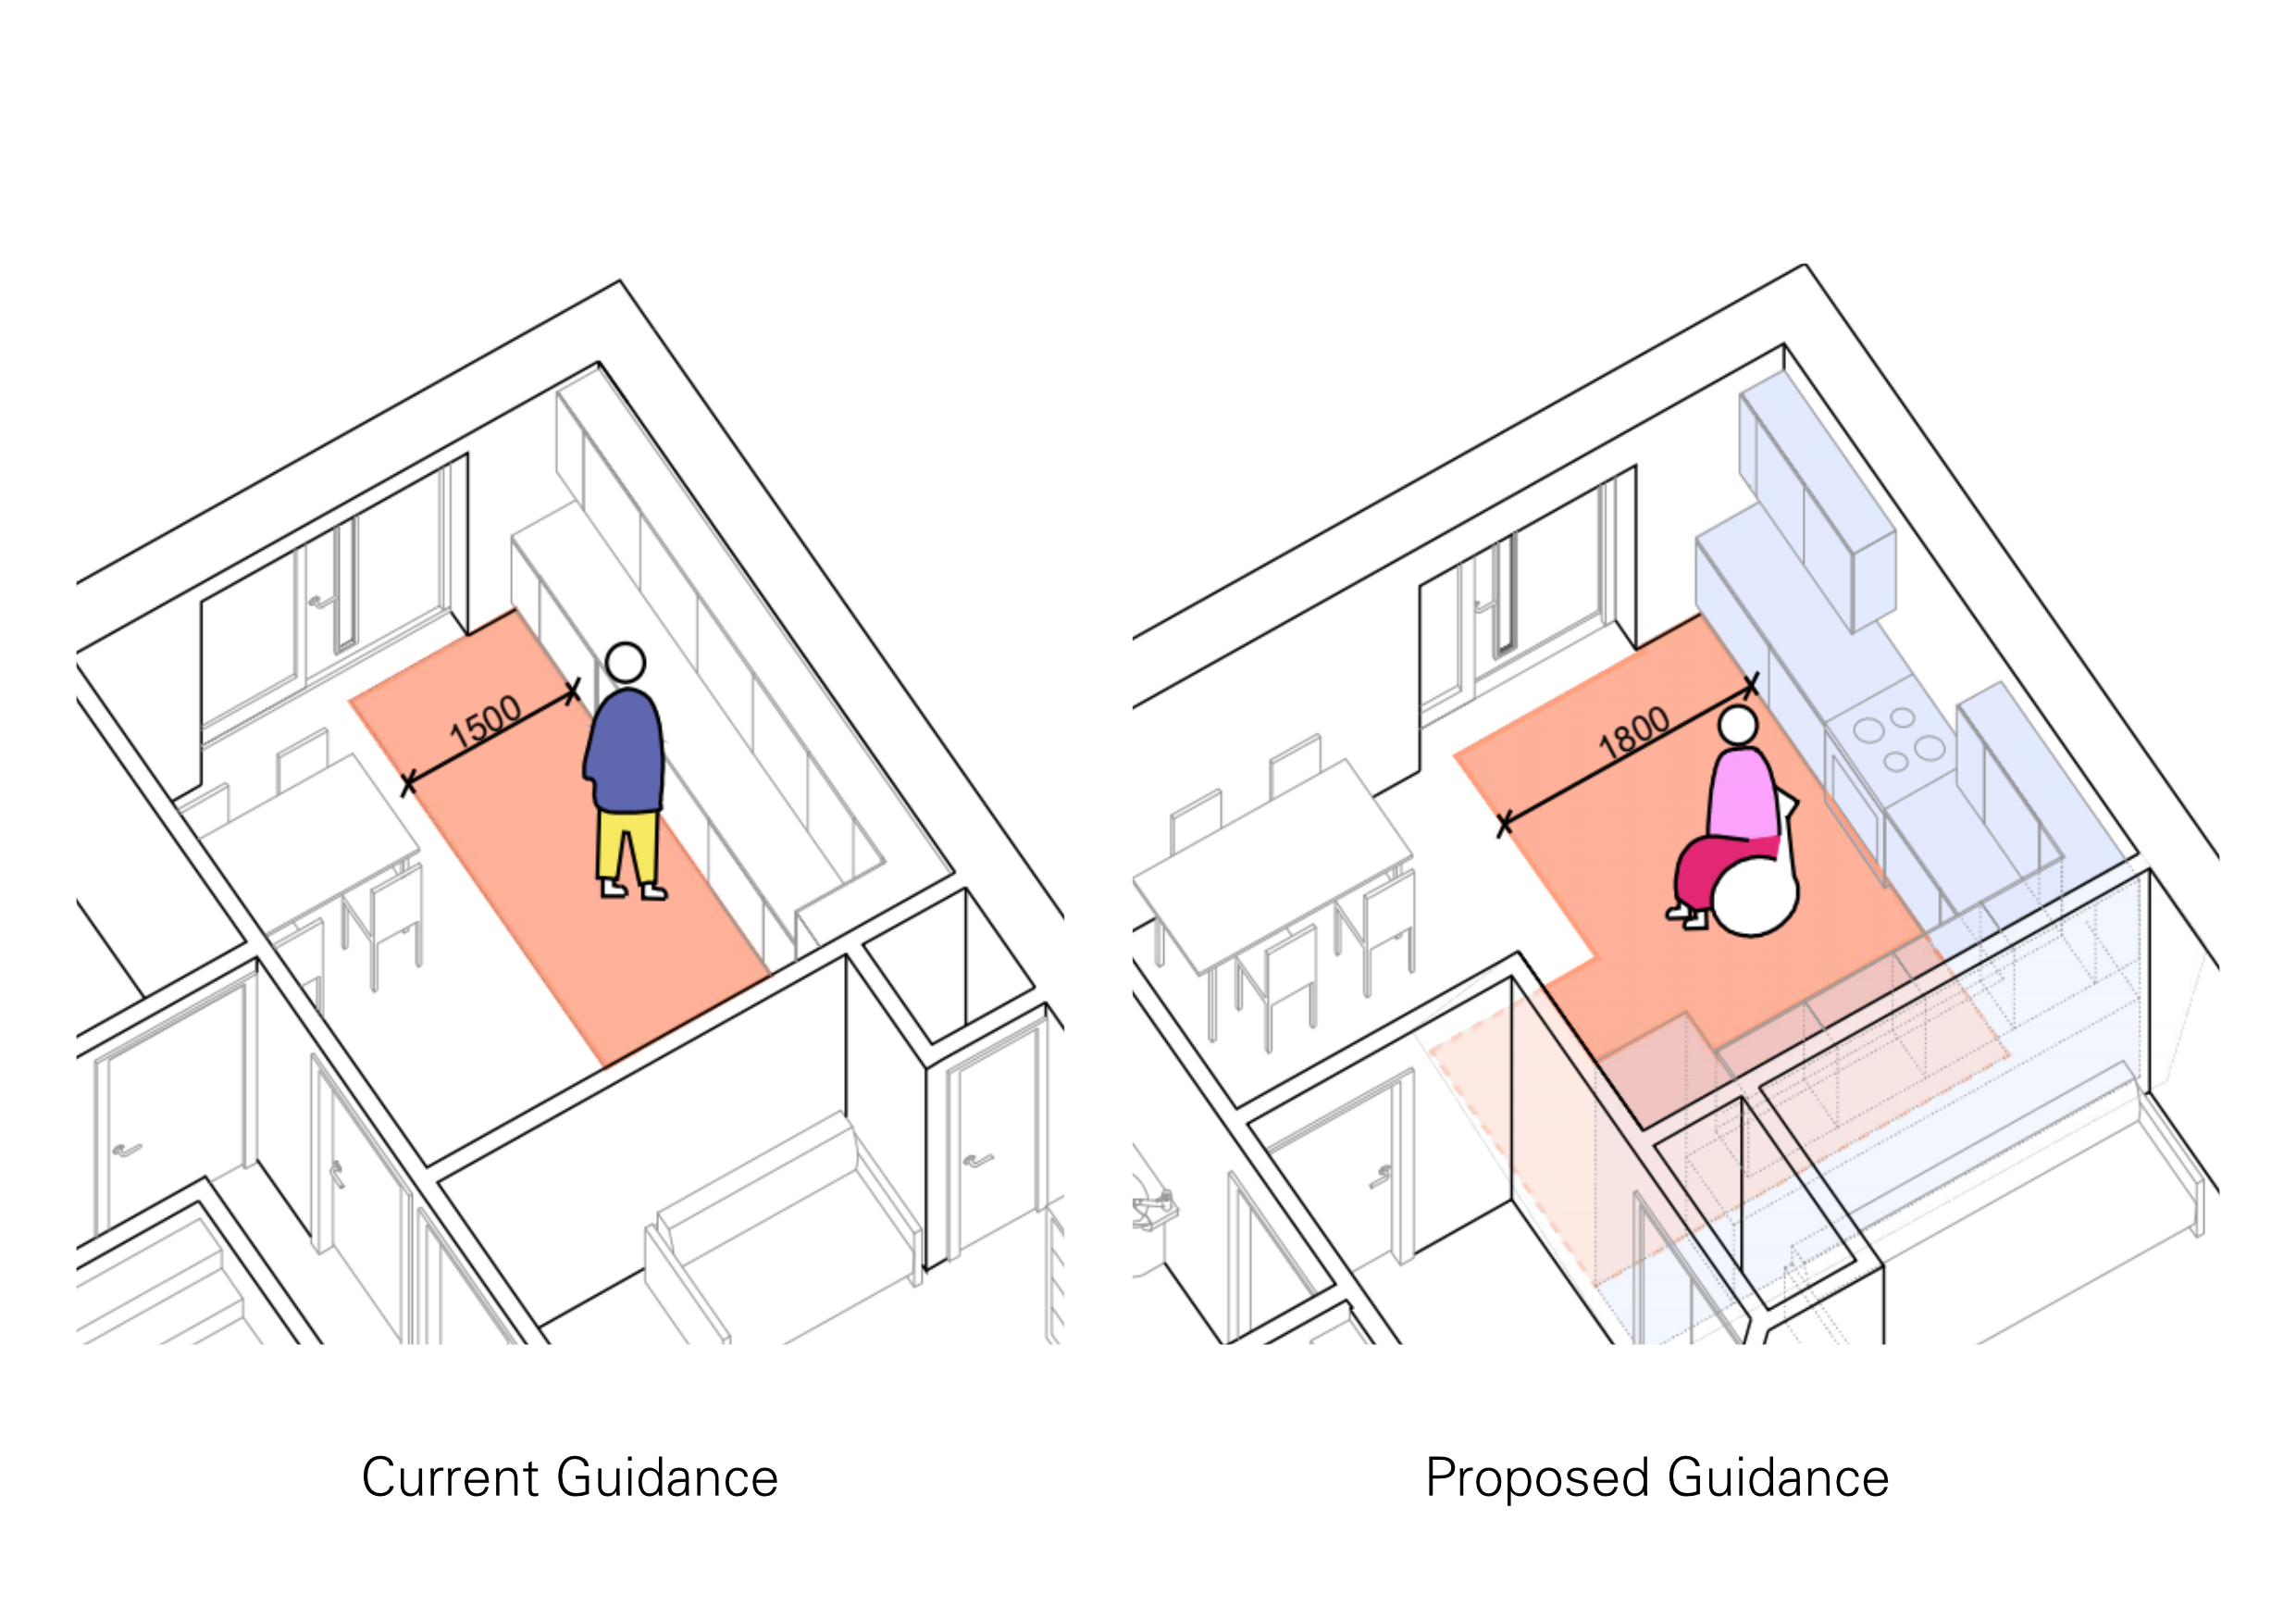 Anderson Bell + Christie invites social landlords to voice opinions on Housing for Varying Needs